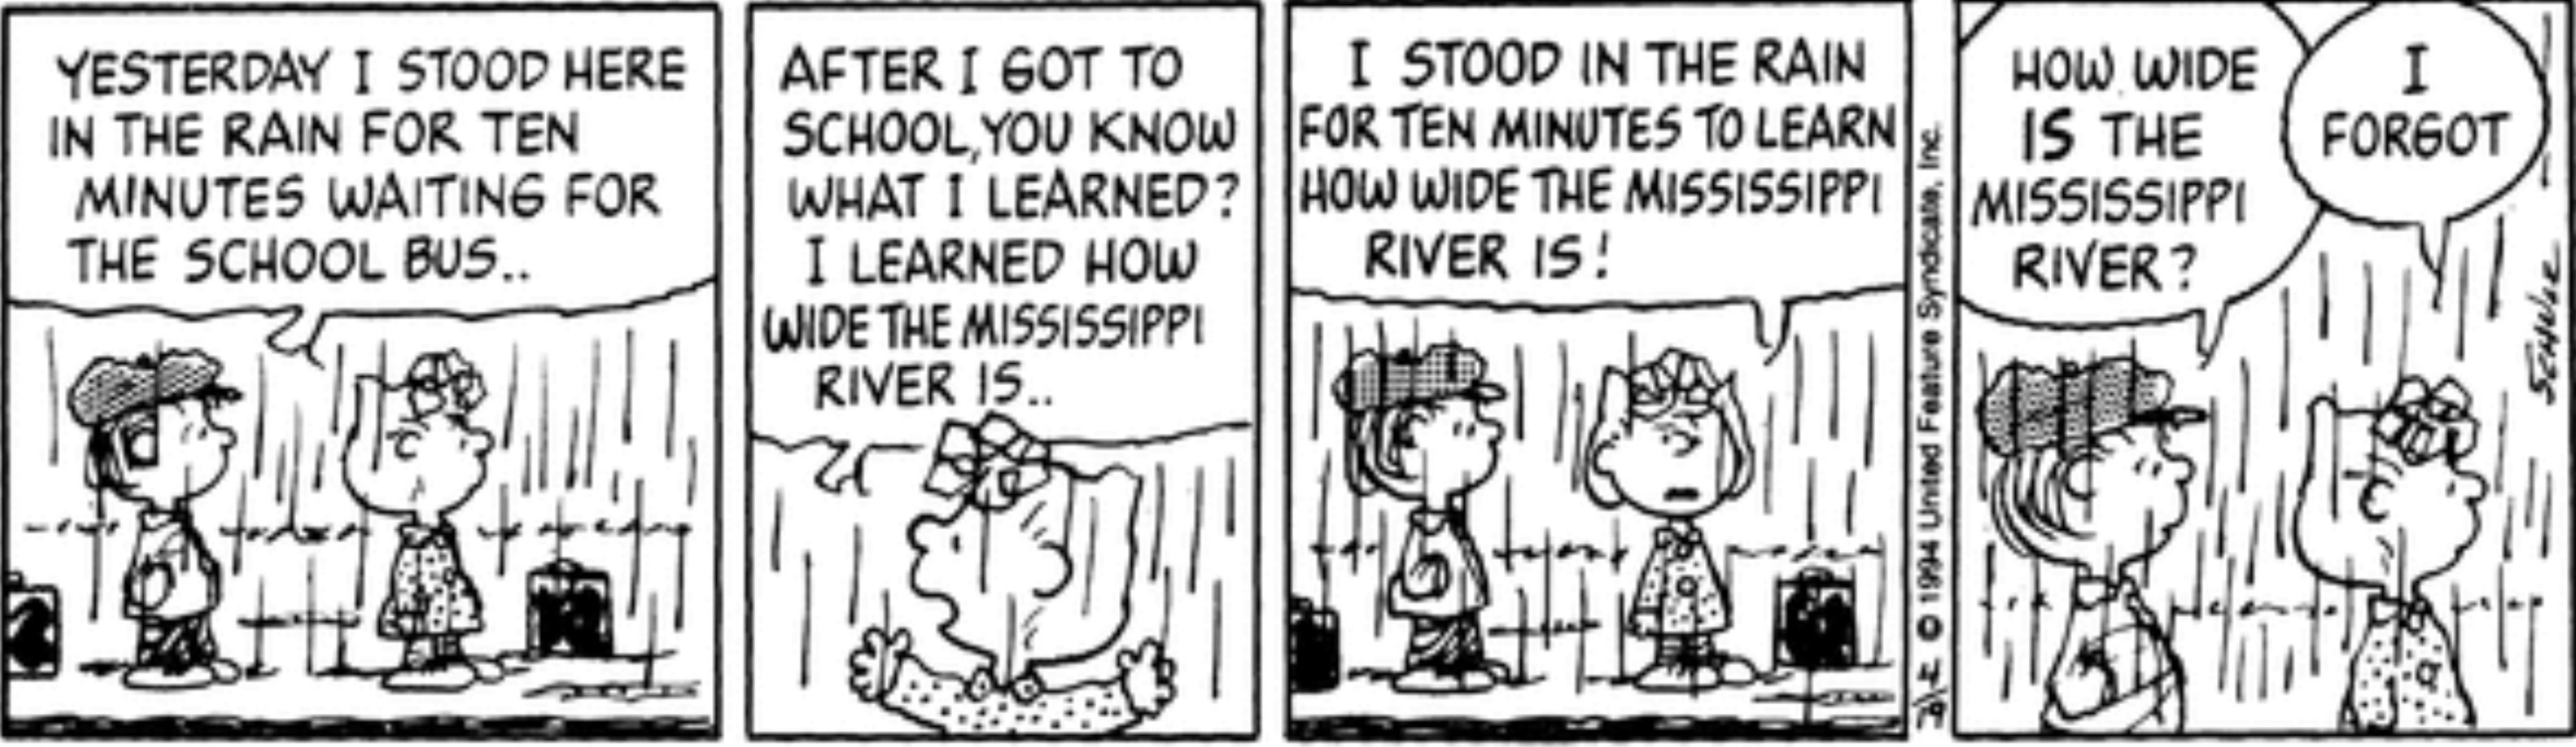 Peanuts, Sally is dismayed she had to stand in the rain just to learn about the Mississippi River.